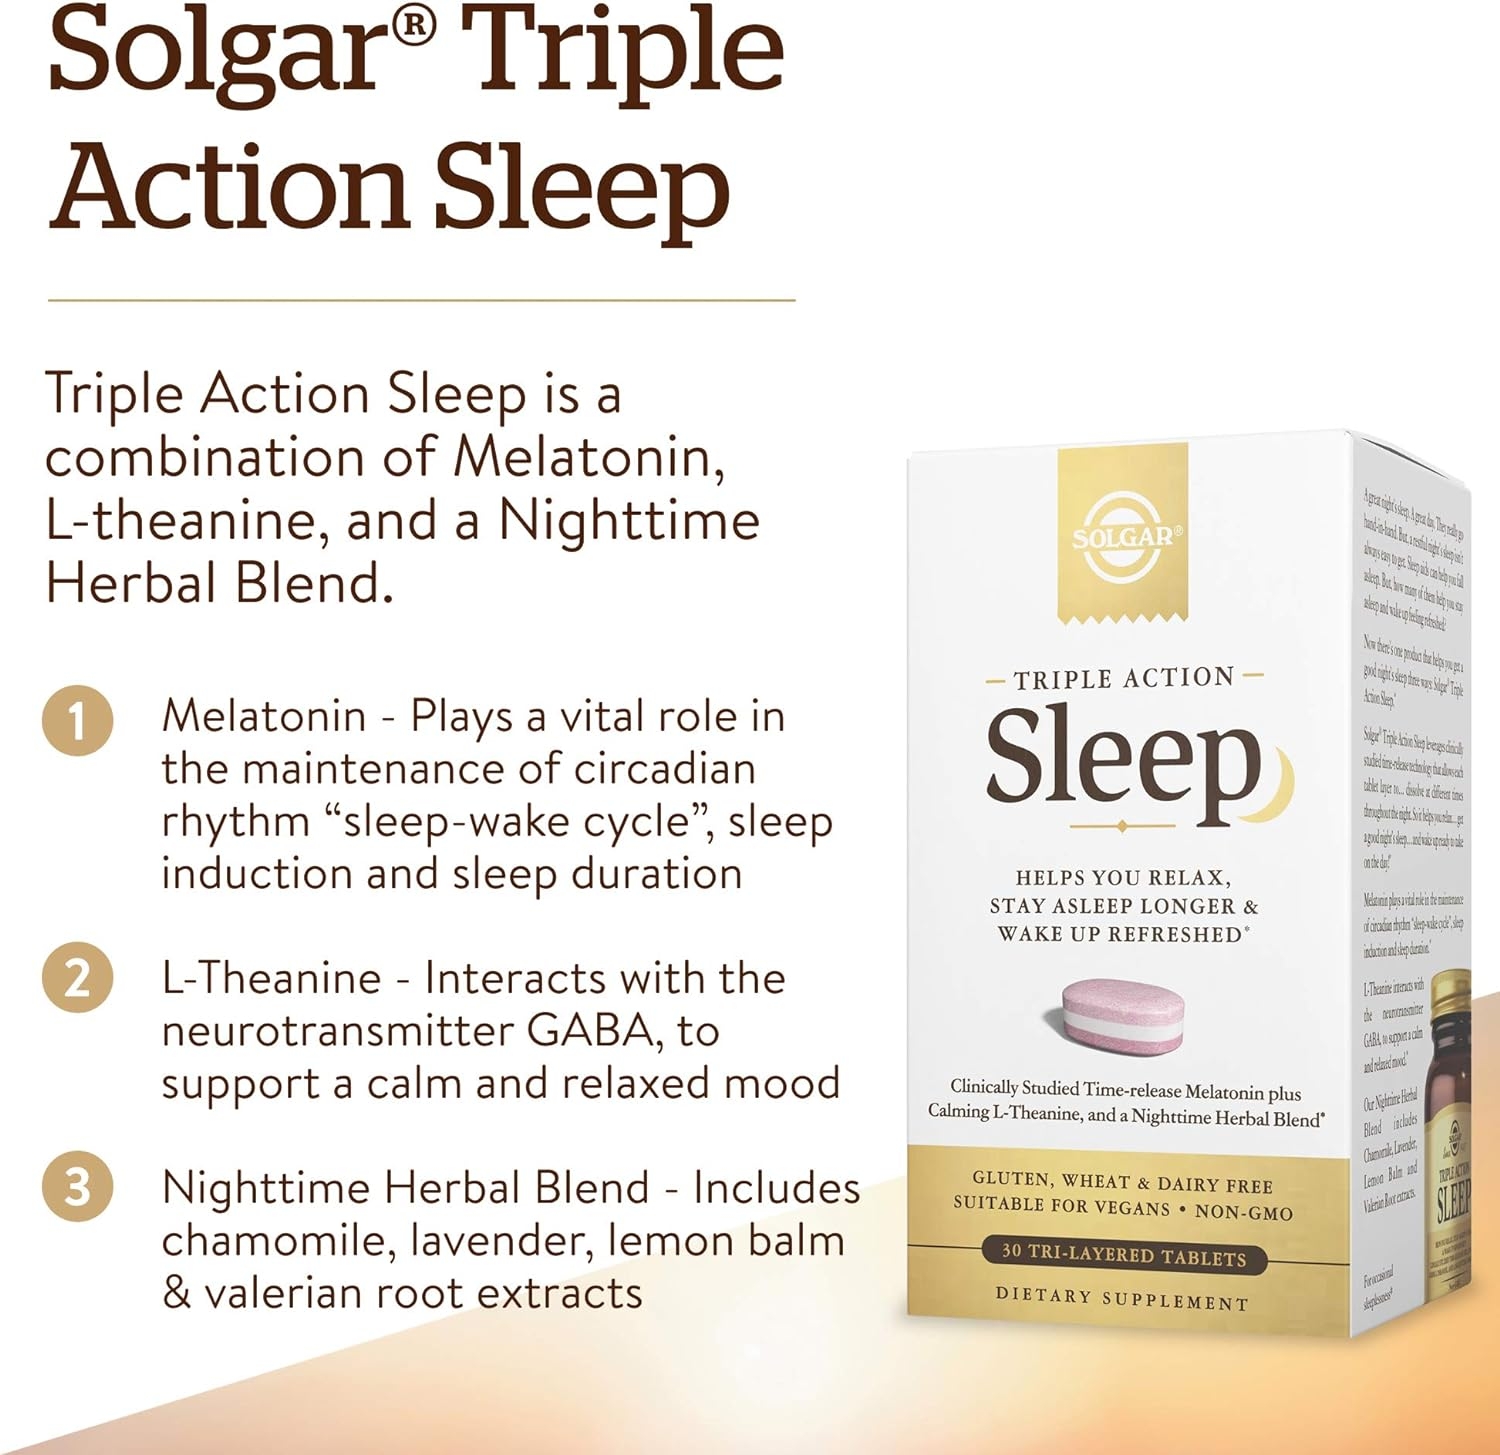 Solgar Triple Action Sleep, 30 Tri-Layer Tablets - Time-Release Melatonin & L-Theanine Plus Herbal Blend - Helps You Relax, Fall Asleep Fast - Non-GMO, Gluten Free - 30 Servings